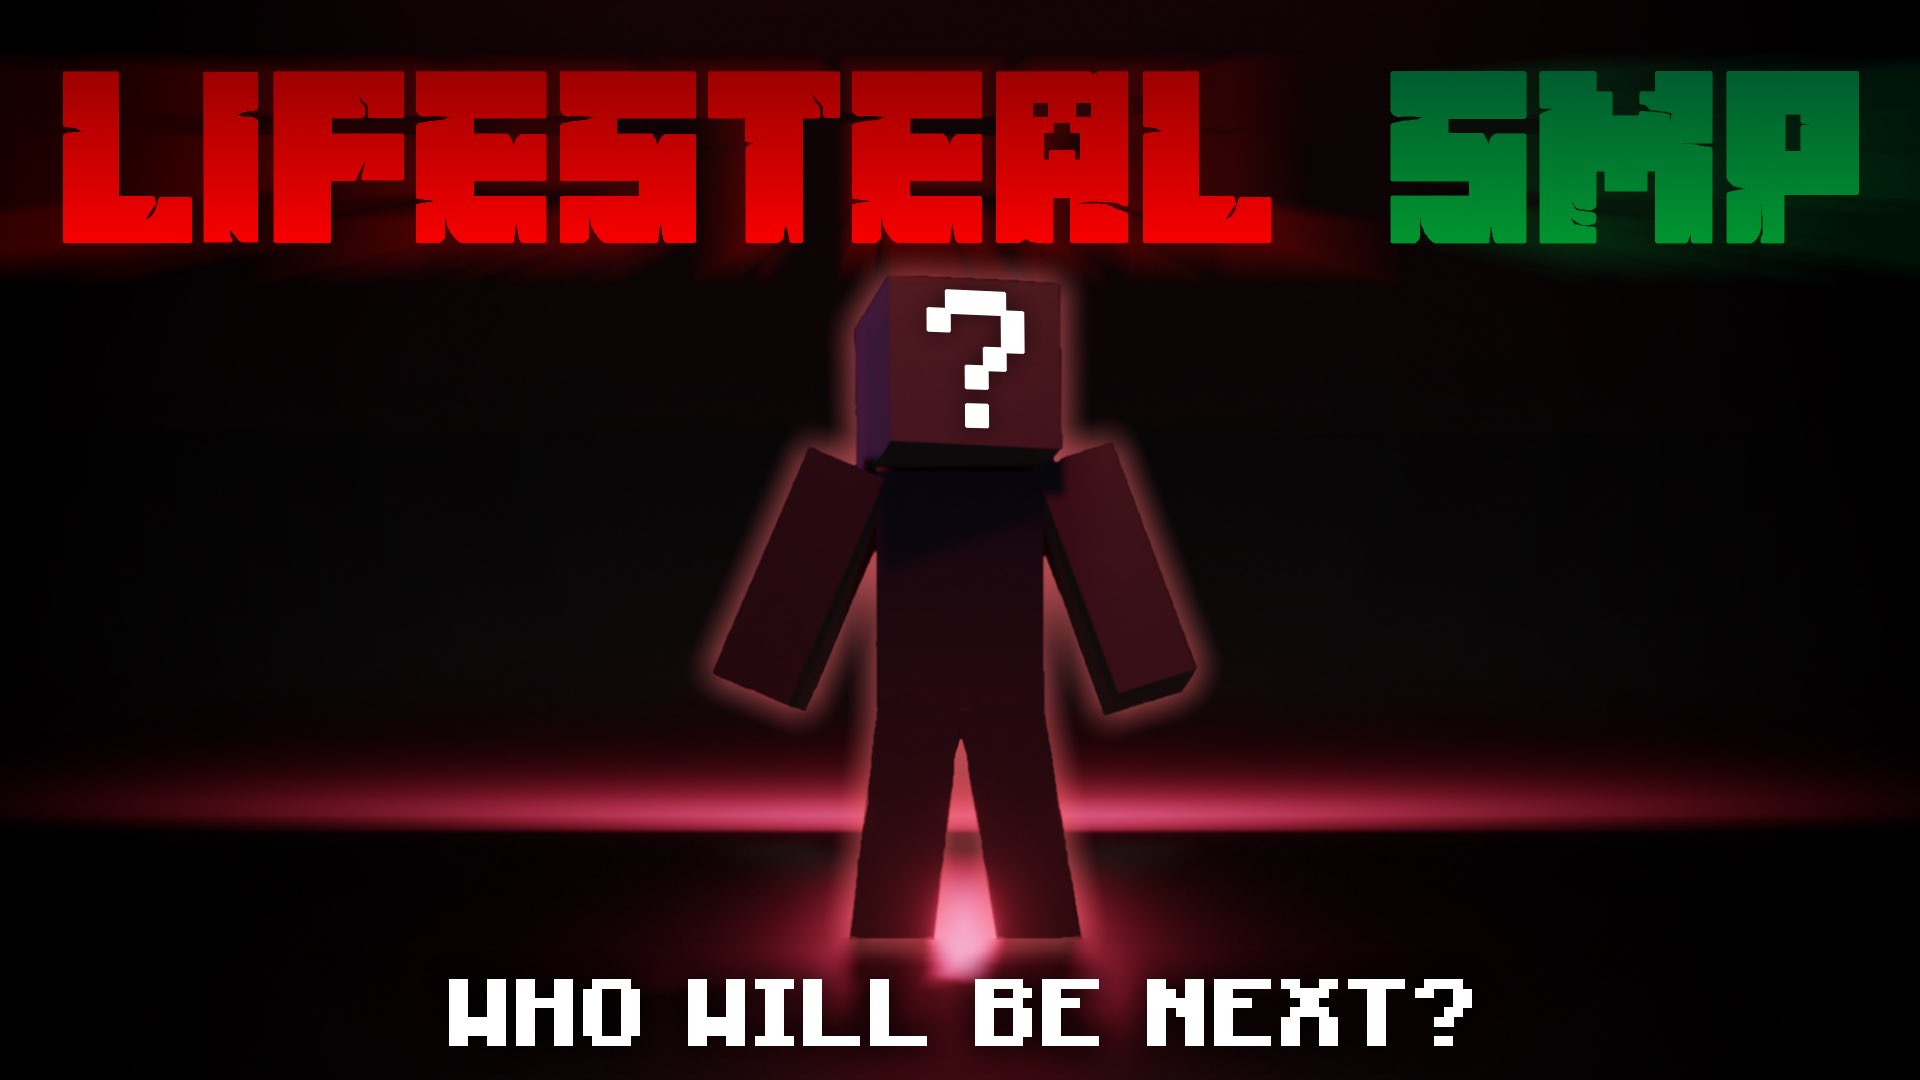 LifeSteal SMP will be next on #LifestealSMP ? If you think you got what it takes, make a video telling us why. ONLY 2 DAYS UNTIL APPS CLOSE! all